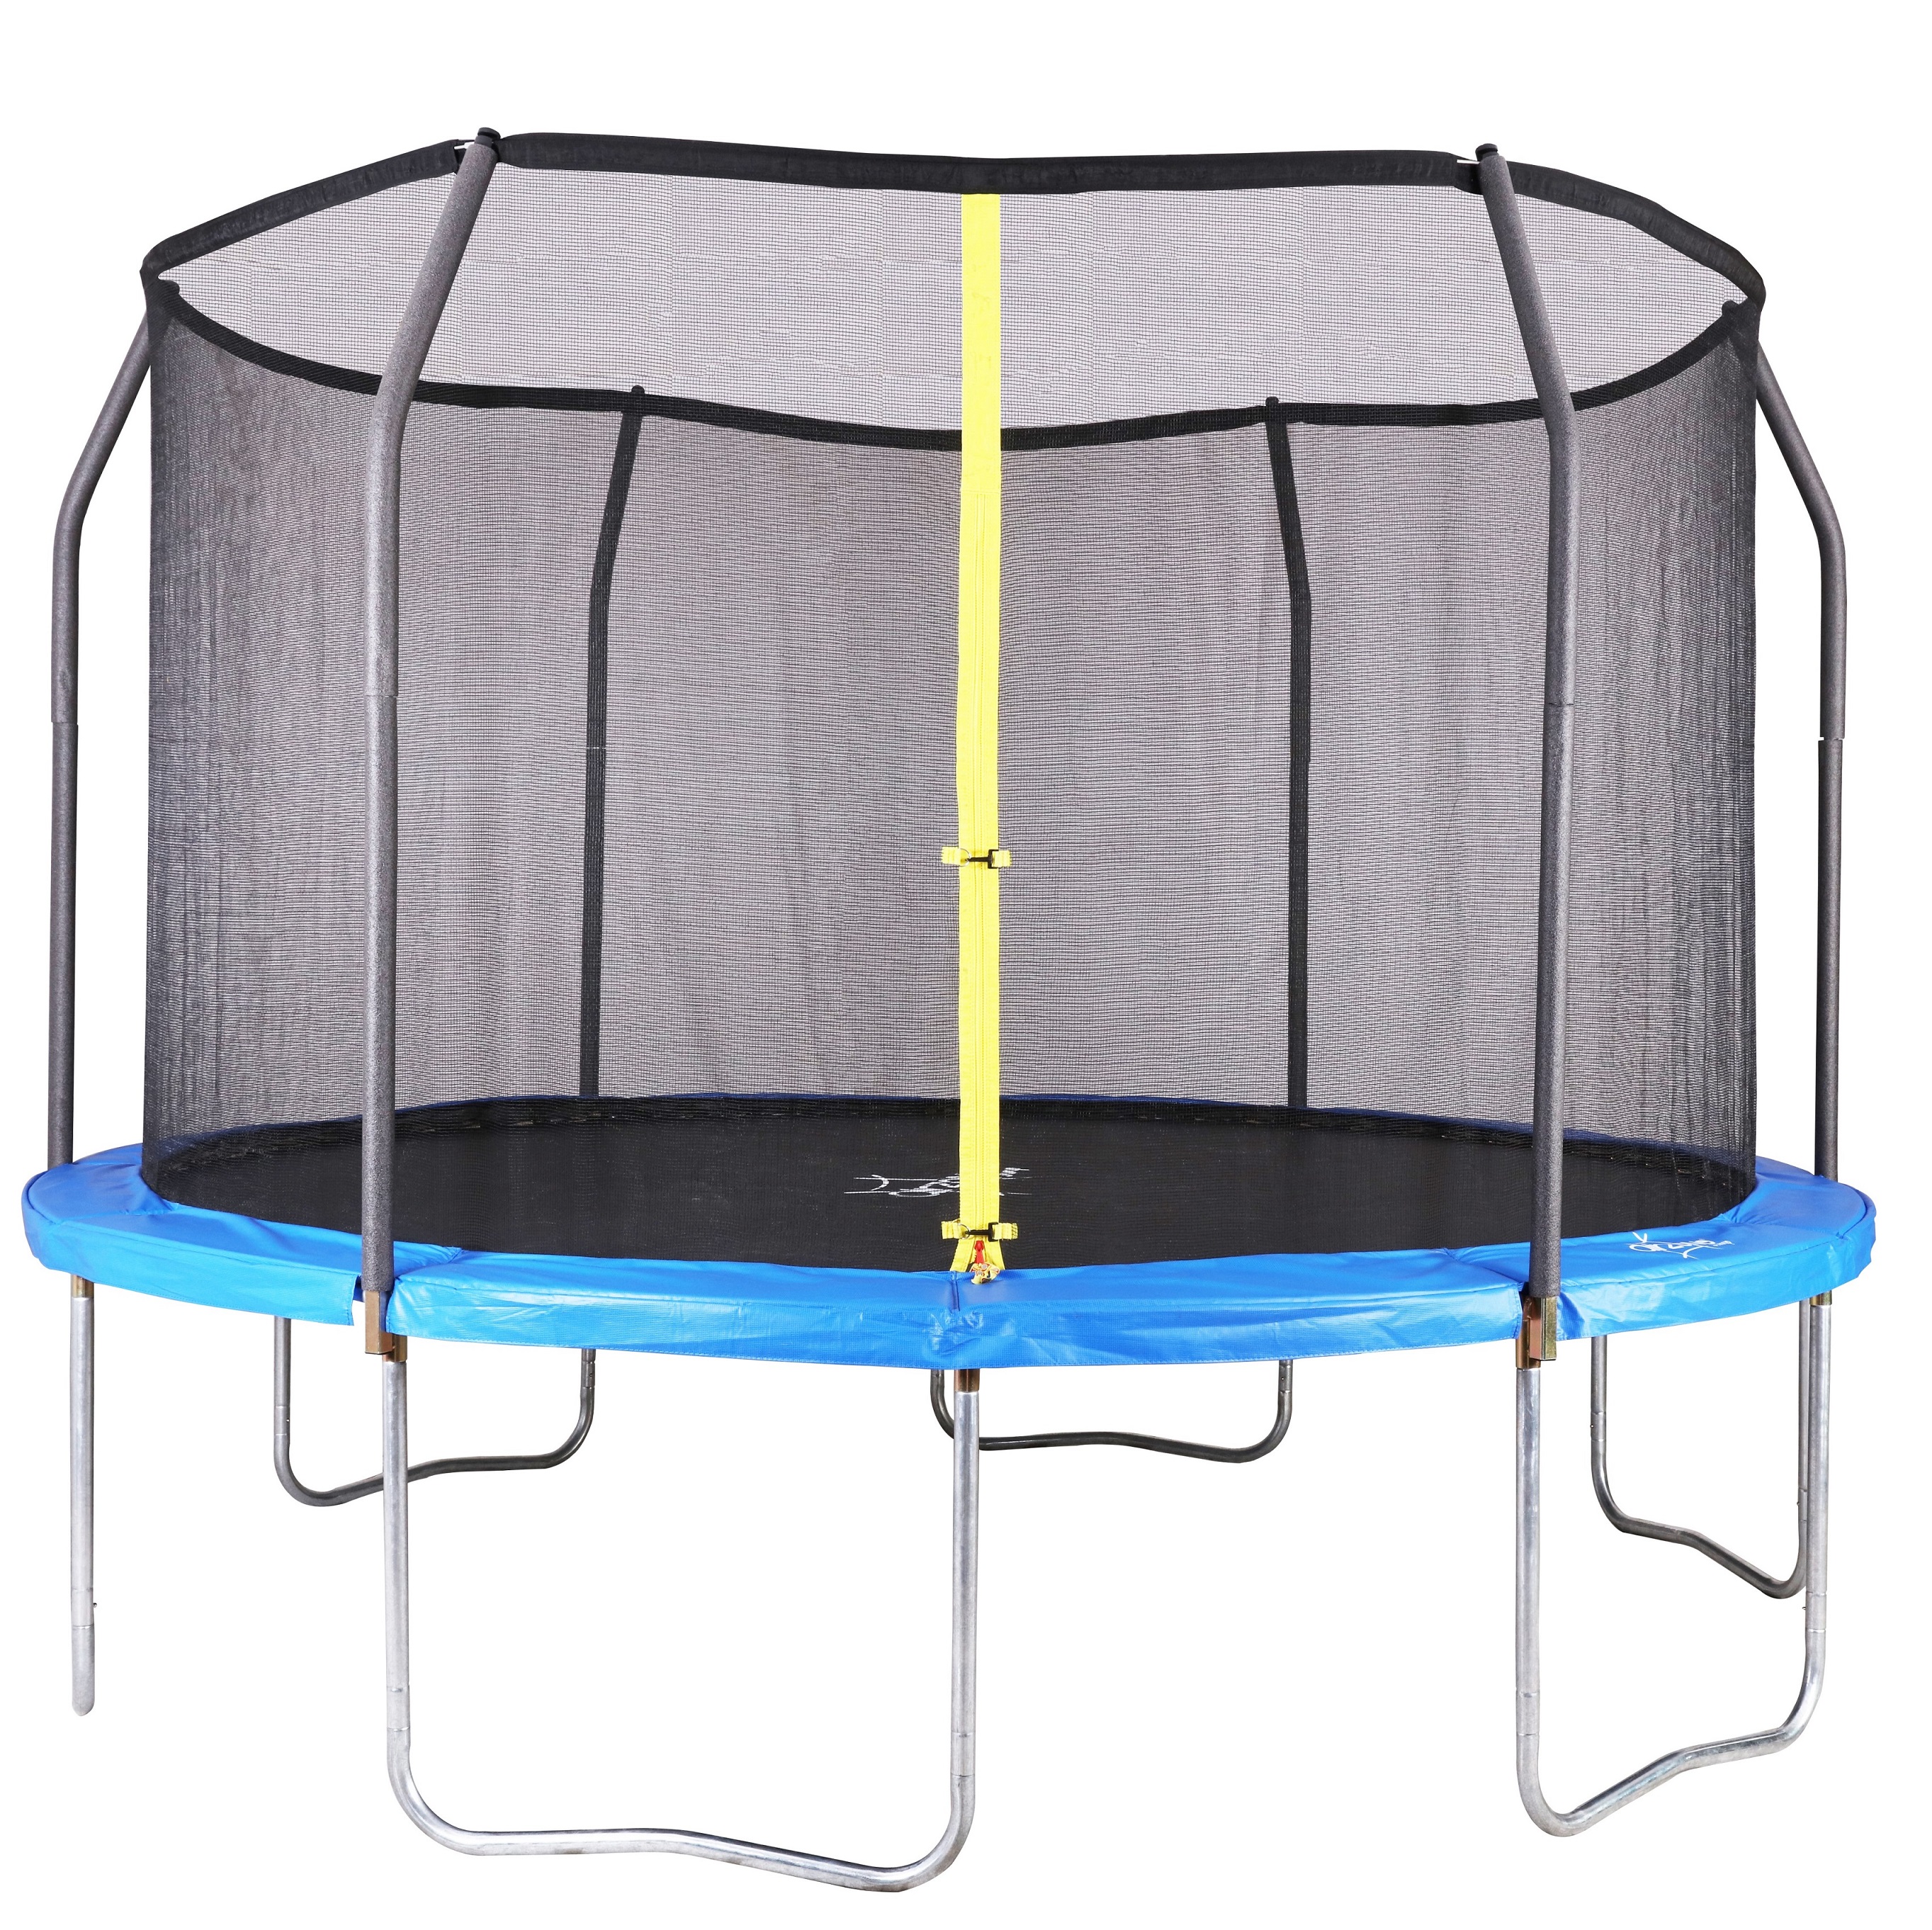 Airzone 12' Trampoline, with Enclosure, Blue - image 1 of 4